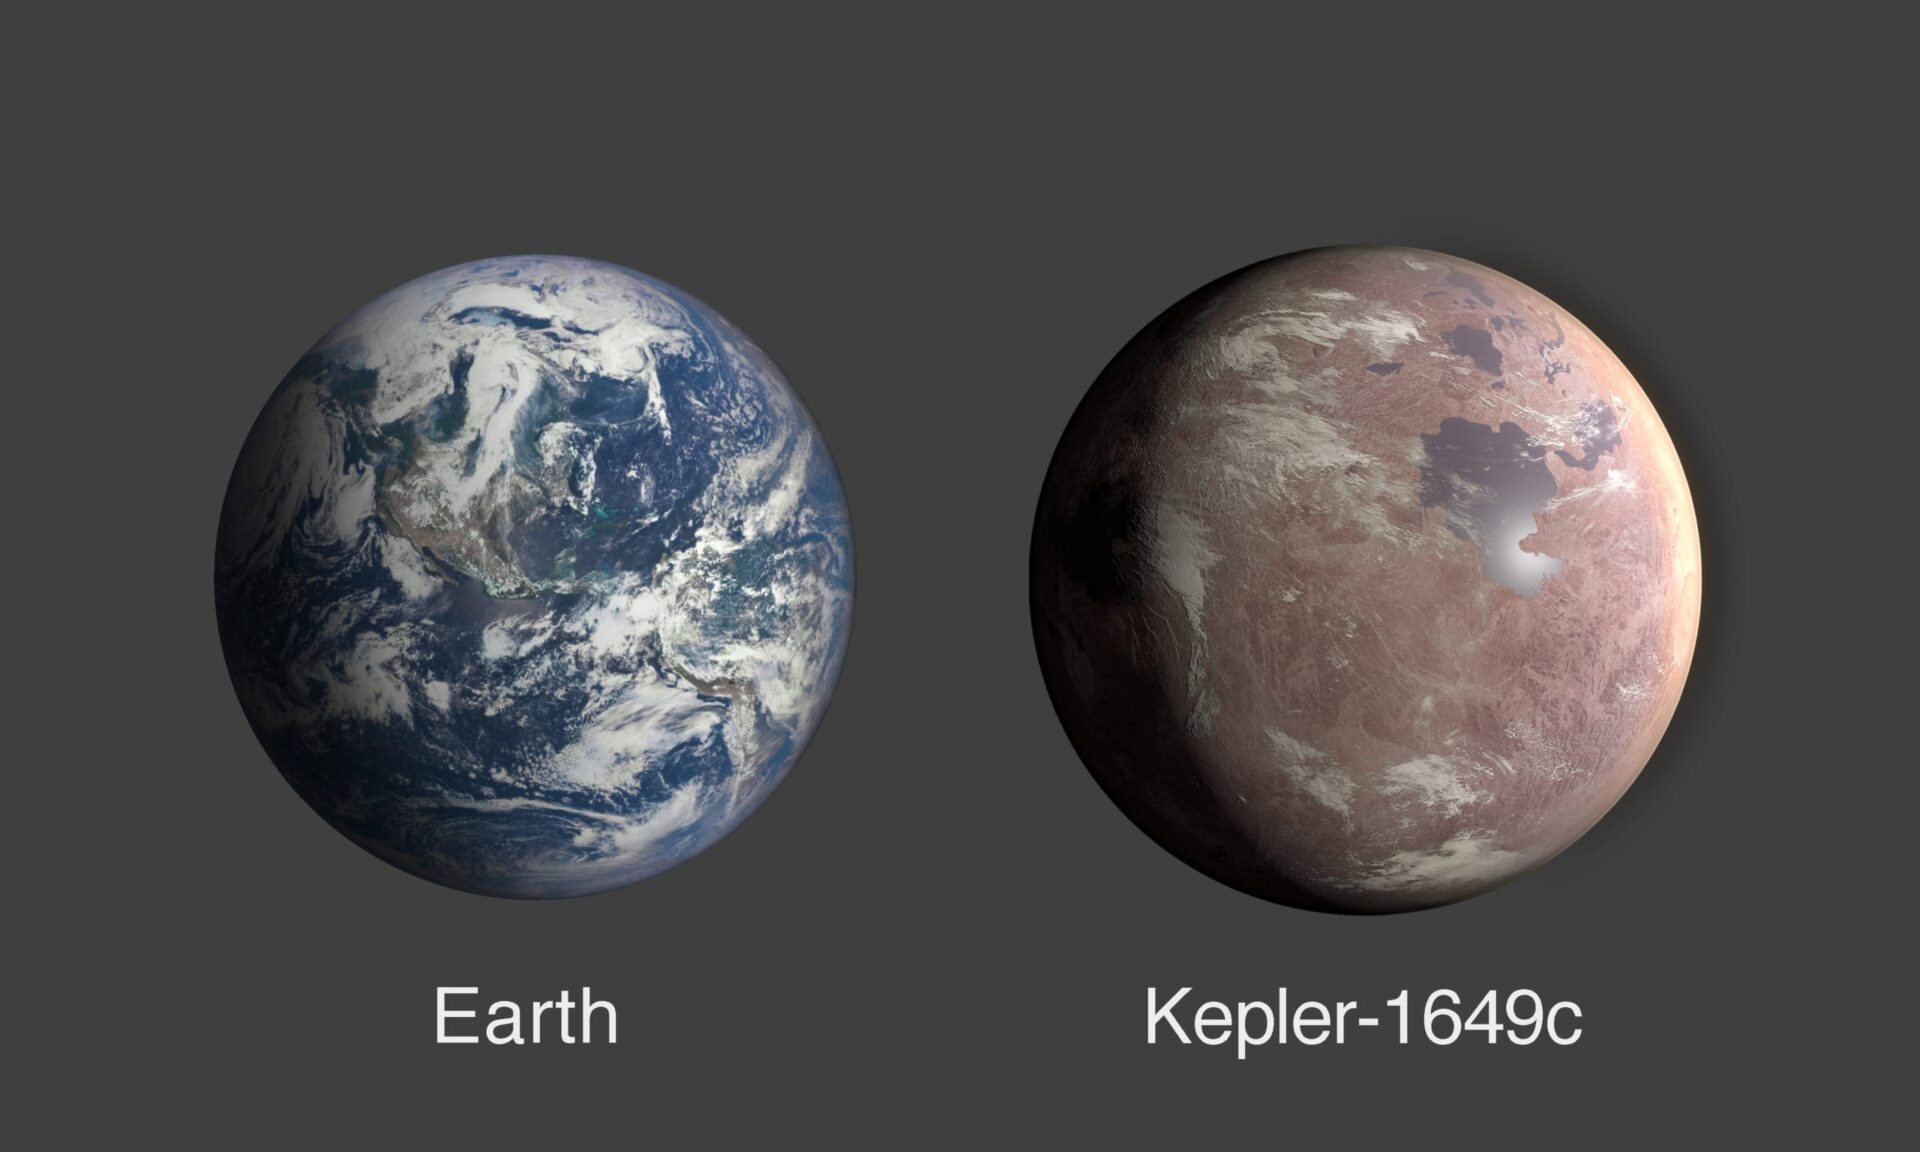 A comparison of Earth and Kepler-1649c, an exoplanet only 1.06 times Earth's radius Credits: NASA/Ames Research Center/Daniel Rutter